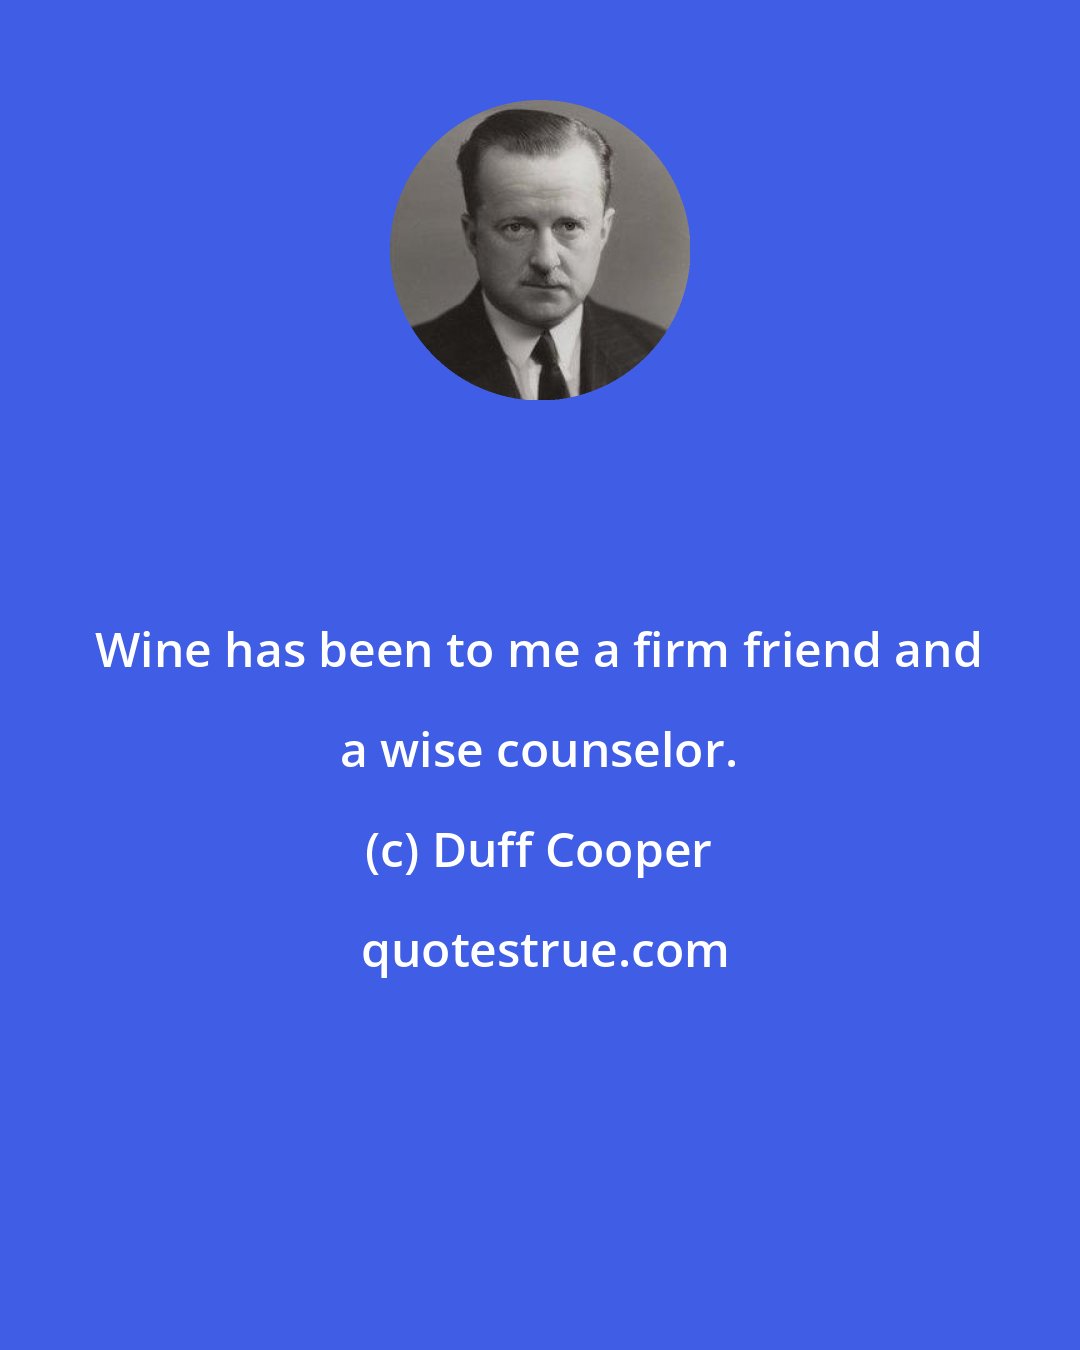 Duff Cooper: Wine has been to me a firm friend and a wise counselor.